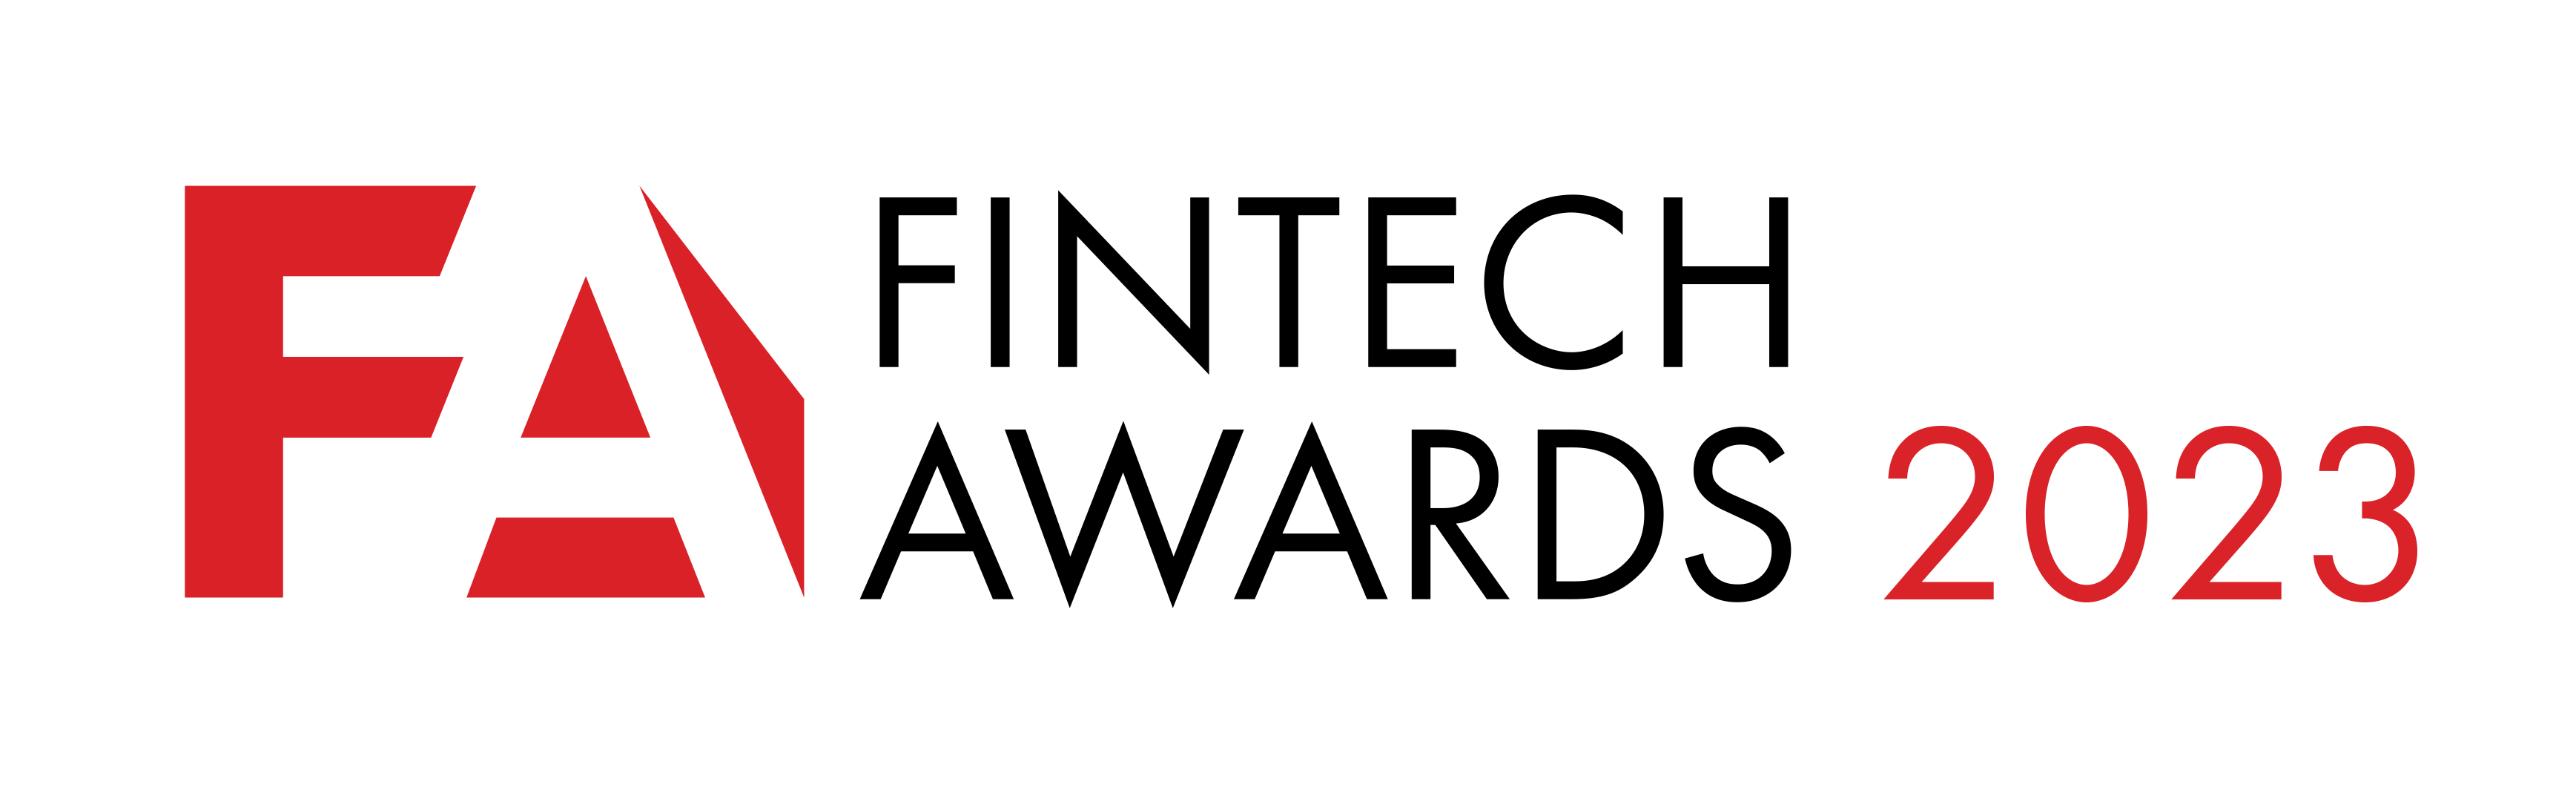 FinTech Awards "Outstanding Innovative SME Banking Services" for<br>3 consecutive years